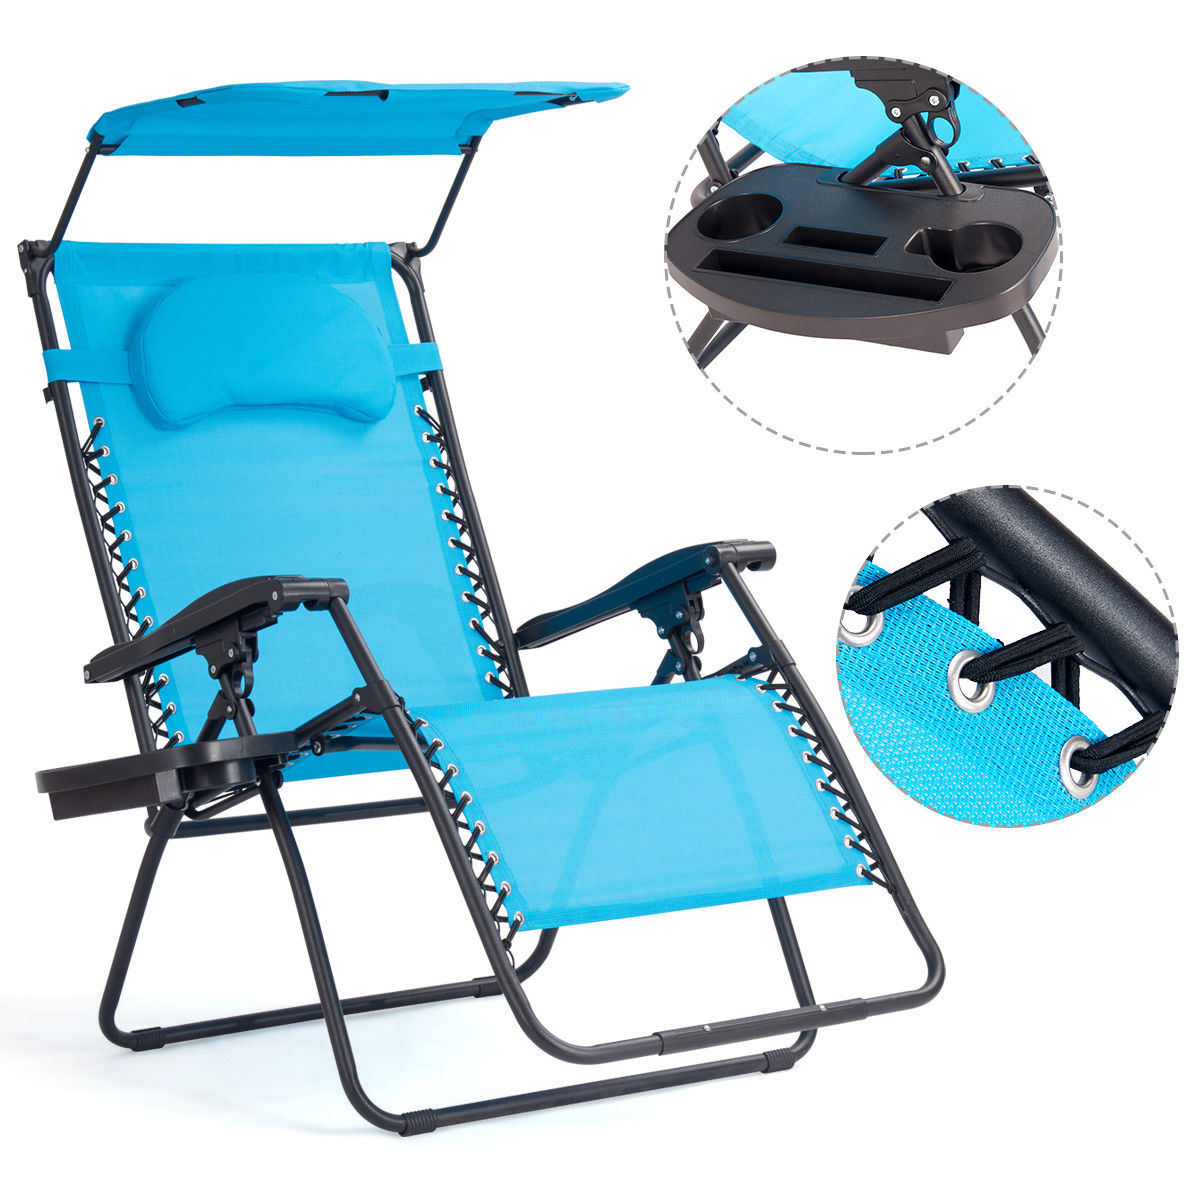 Gymax Folding Recliner Zero Gravity Lounge Chair W/ Shade Canopy Cup Holder Blue - image 3 of 10